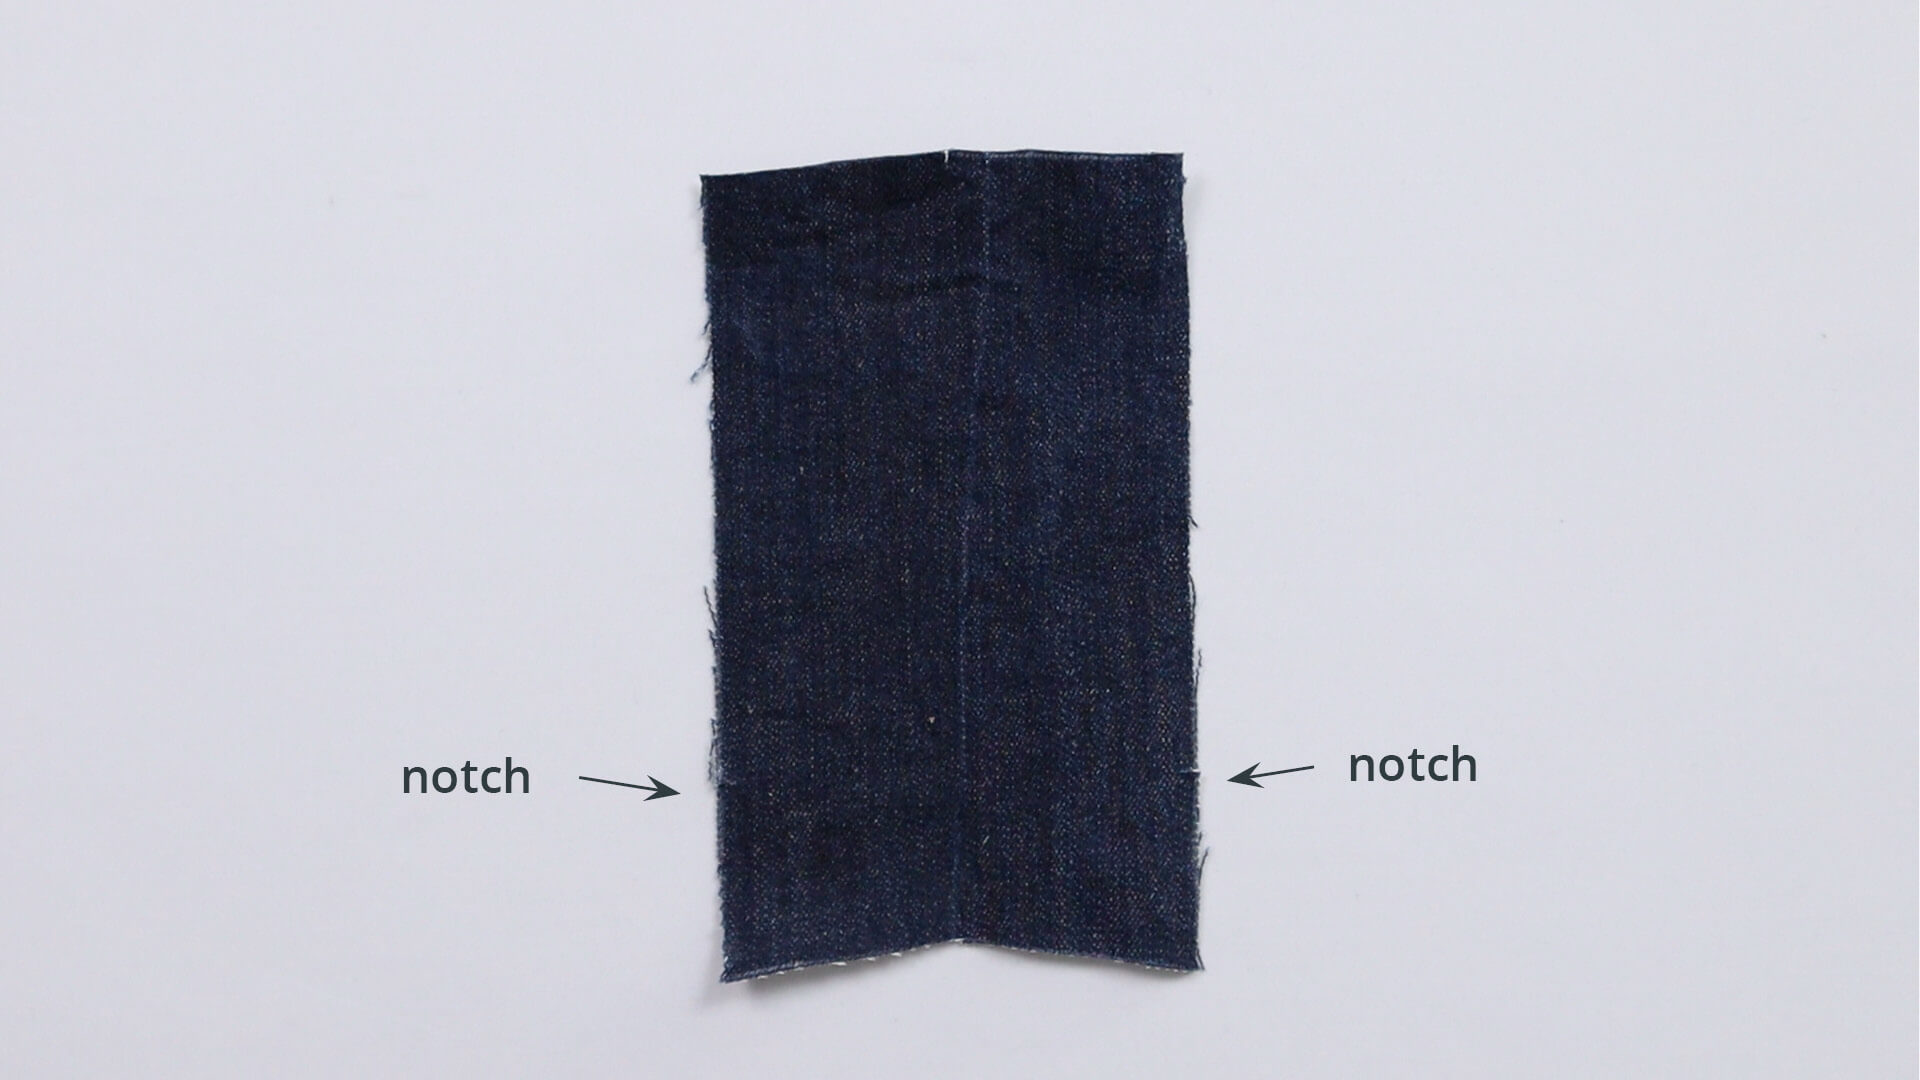 smartPATTERN sewing instructions for fly with zipper for jeans